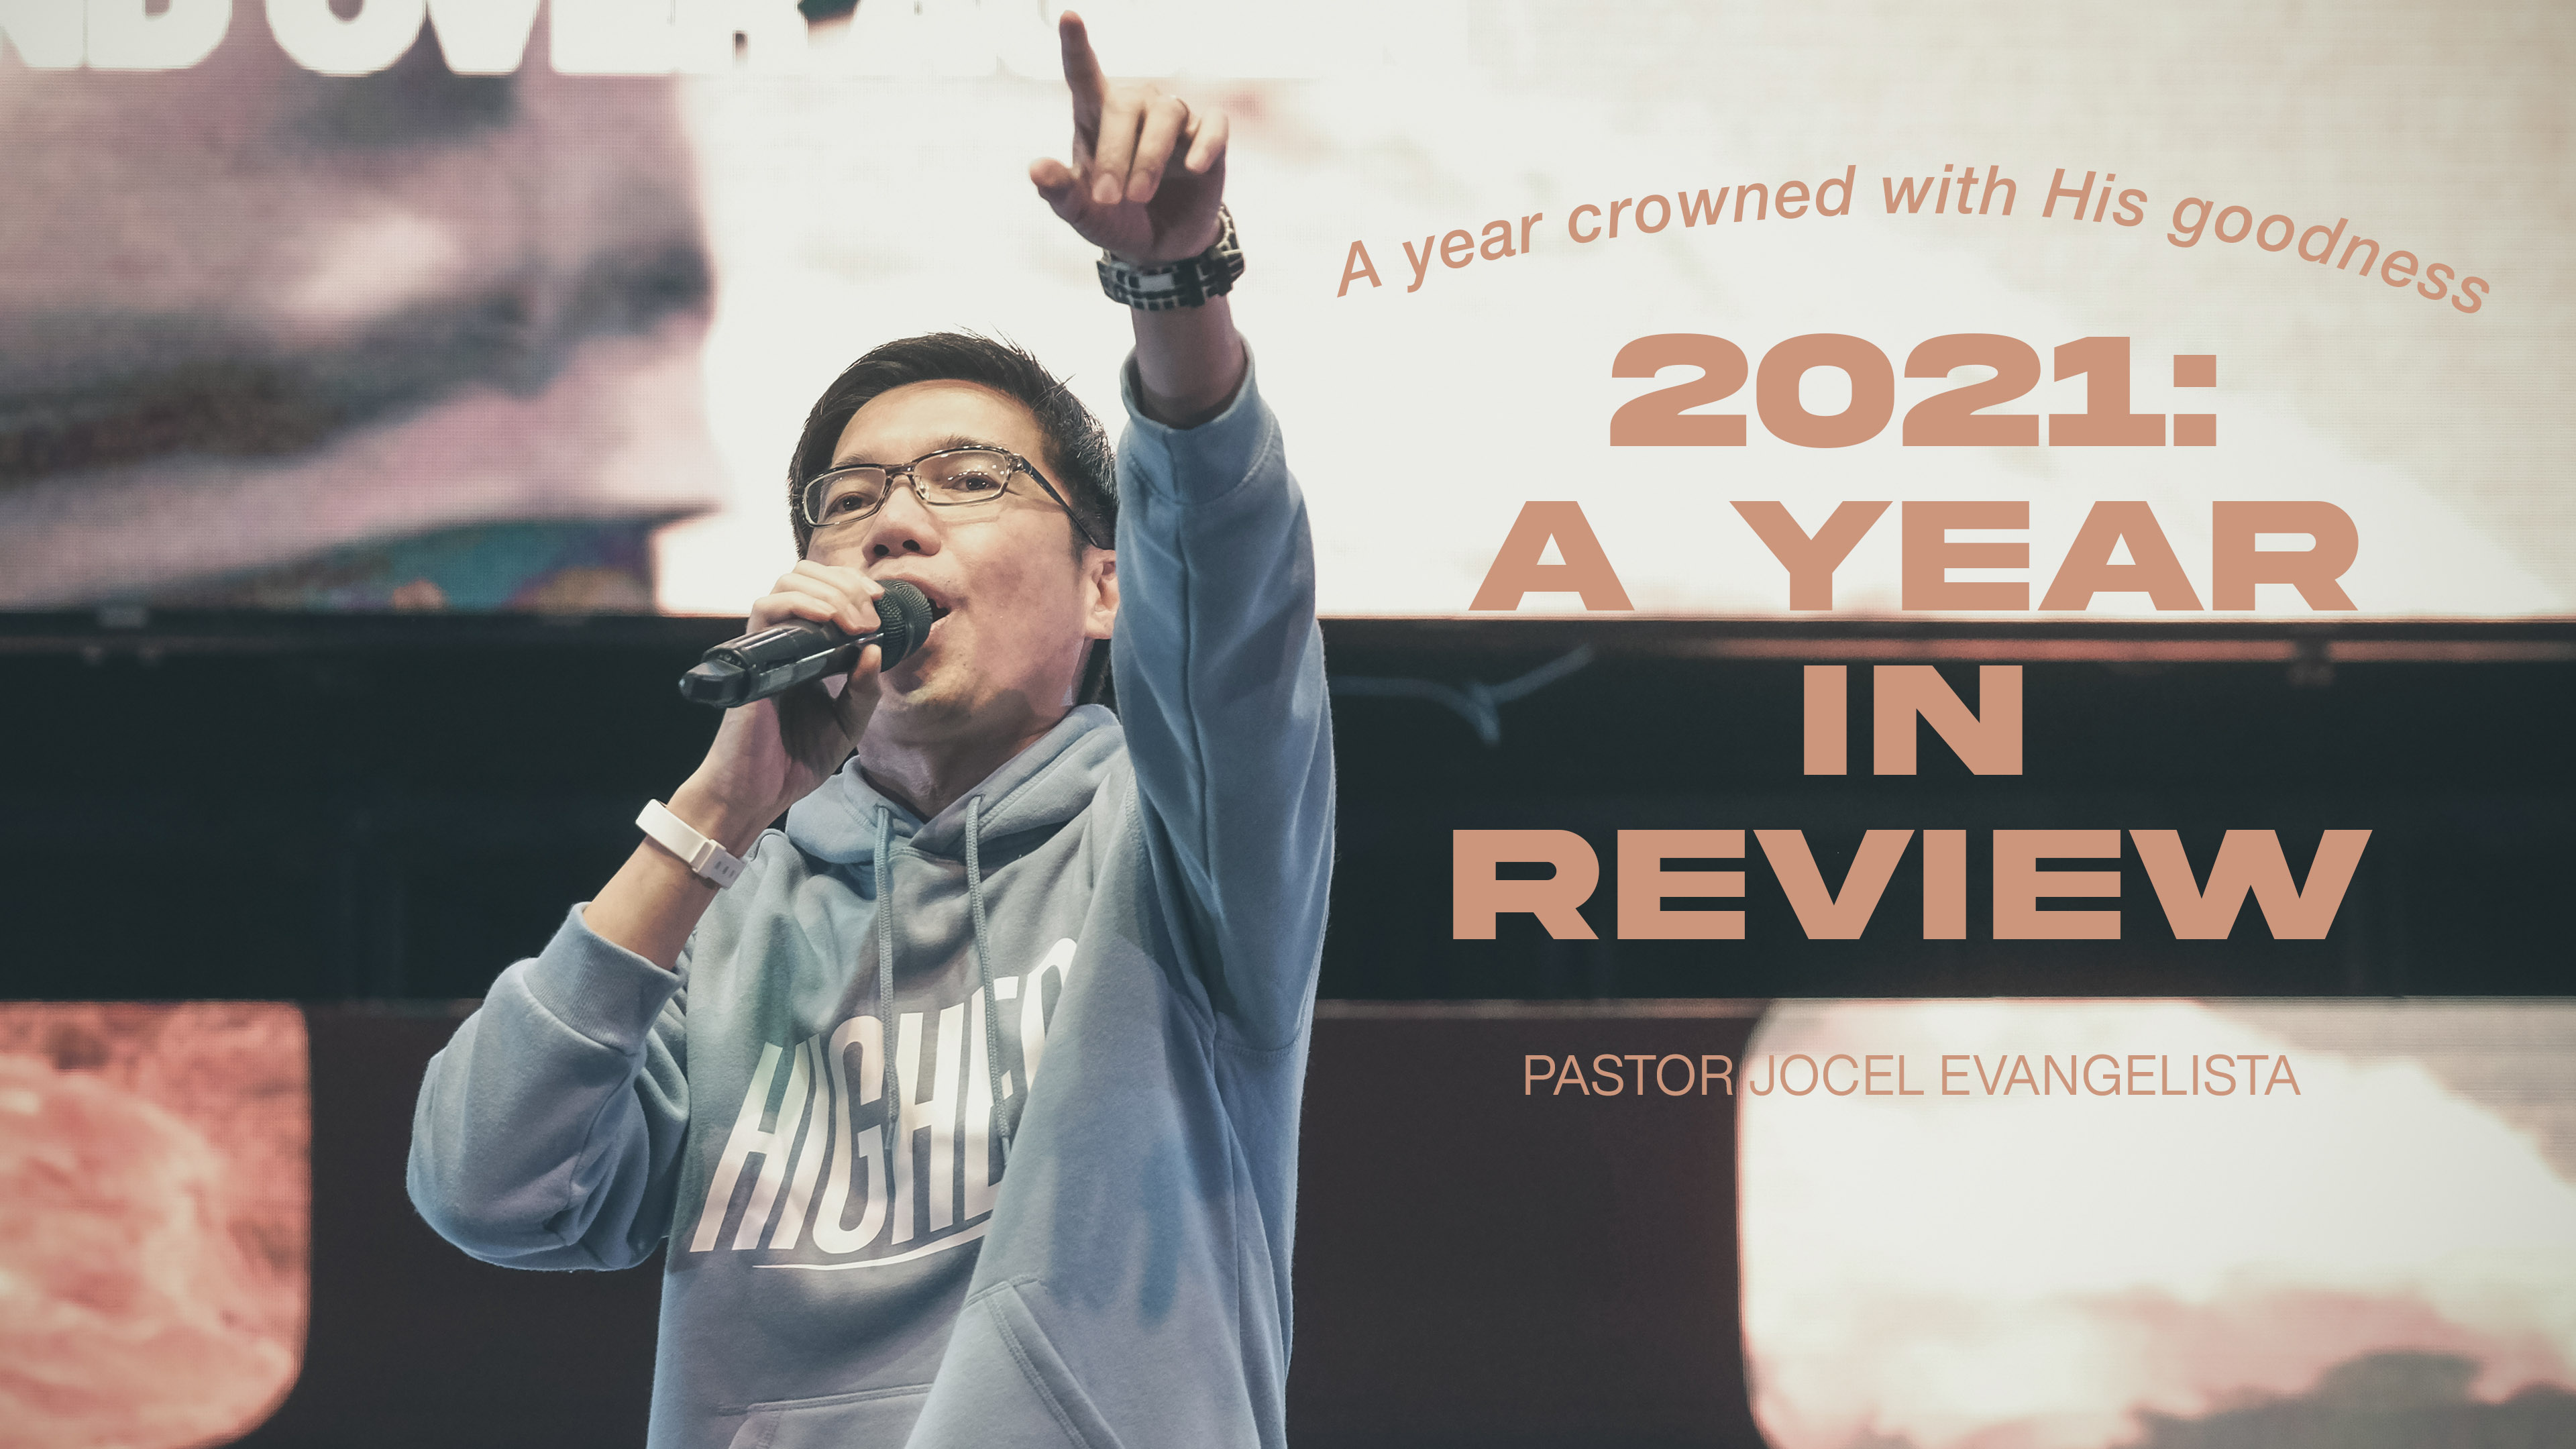 A YEAR CROWNED WITH HIS GOODNESS 2021: A YEAR IN REVIEW Image